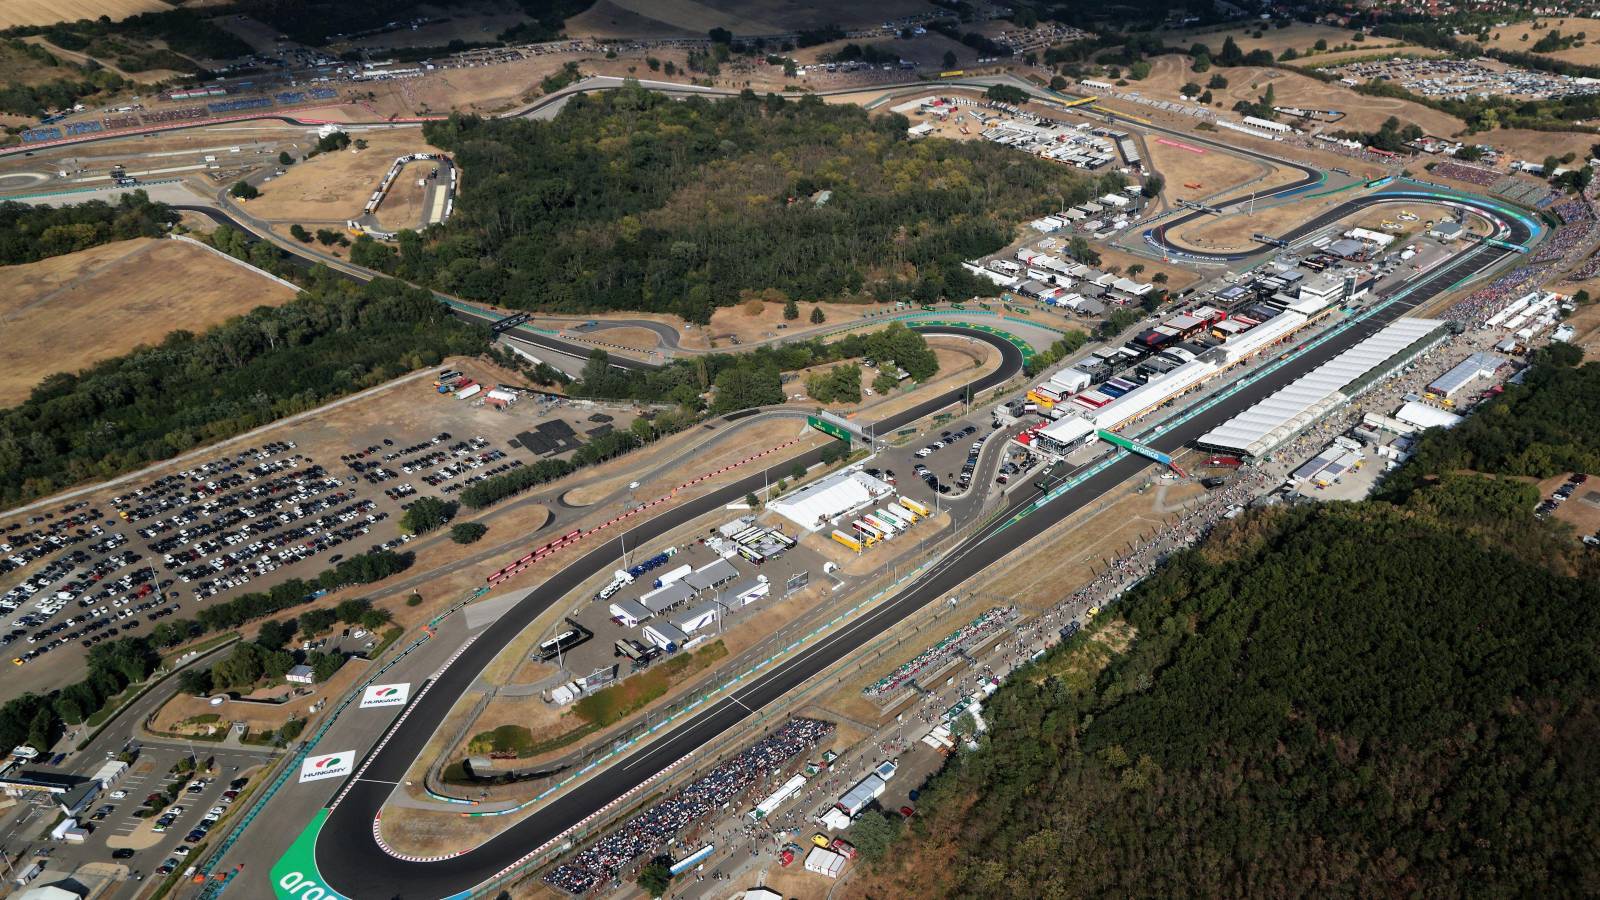 Aerial view of the Hungaroring. July 2022.